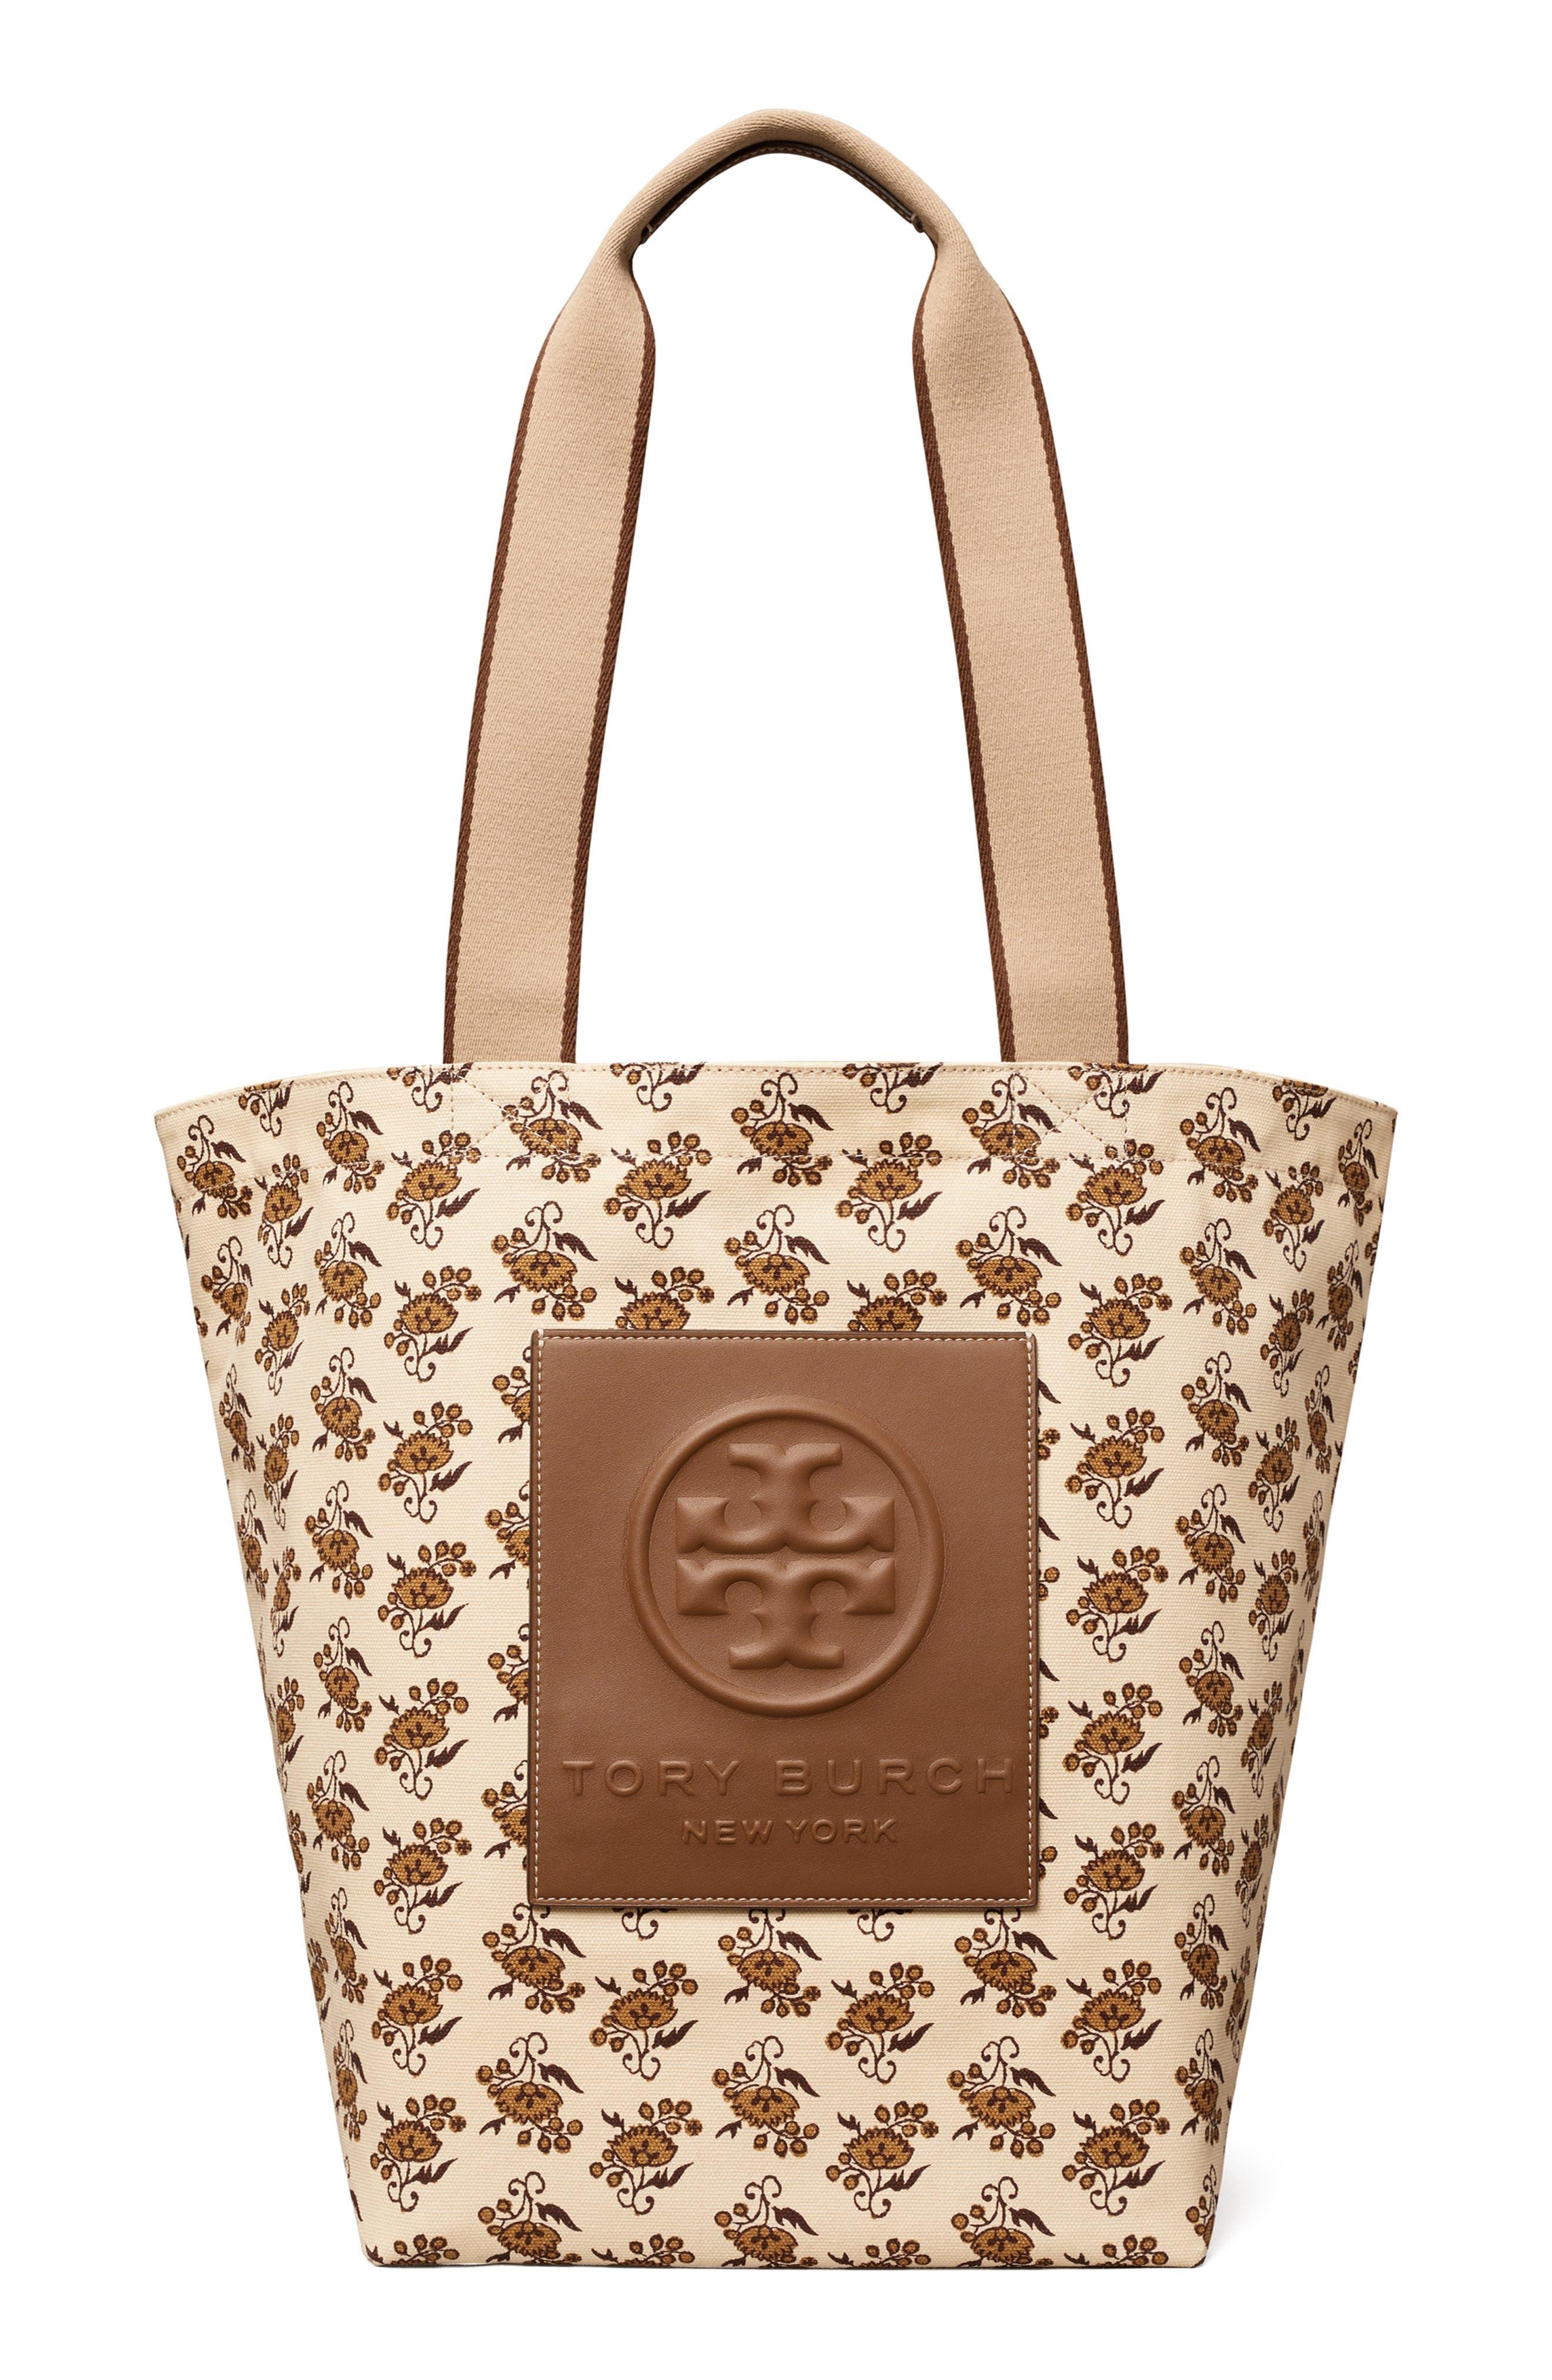 tory burch canvas tote bag